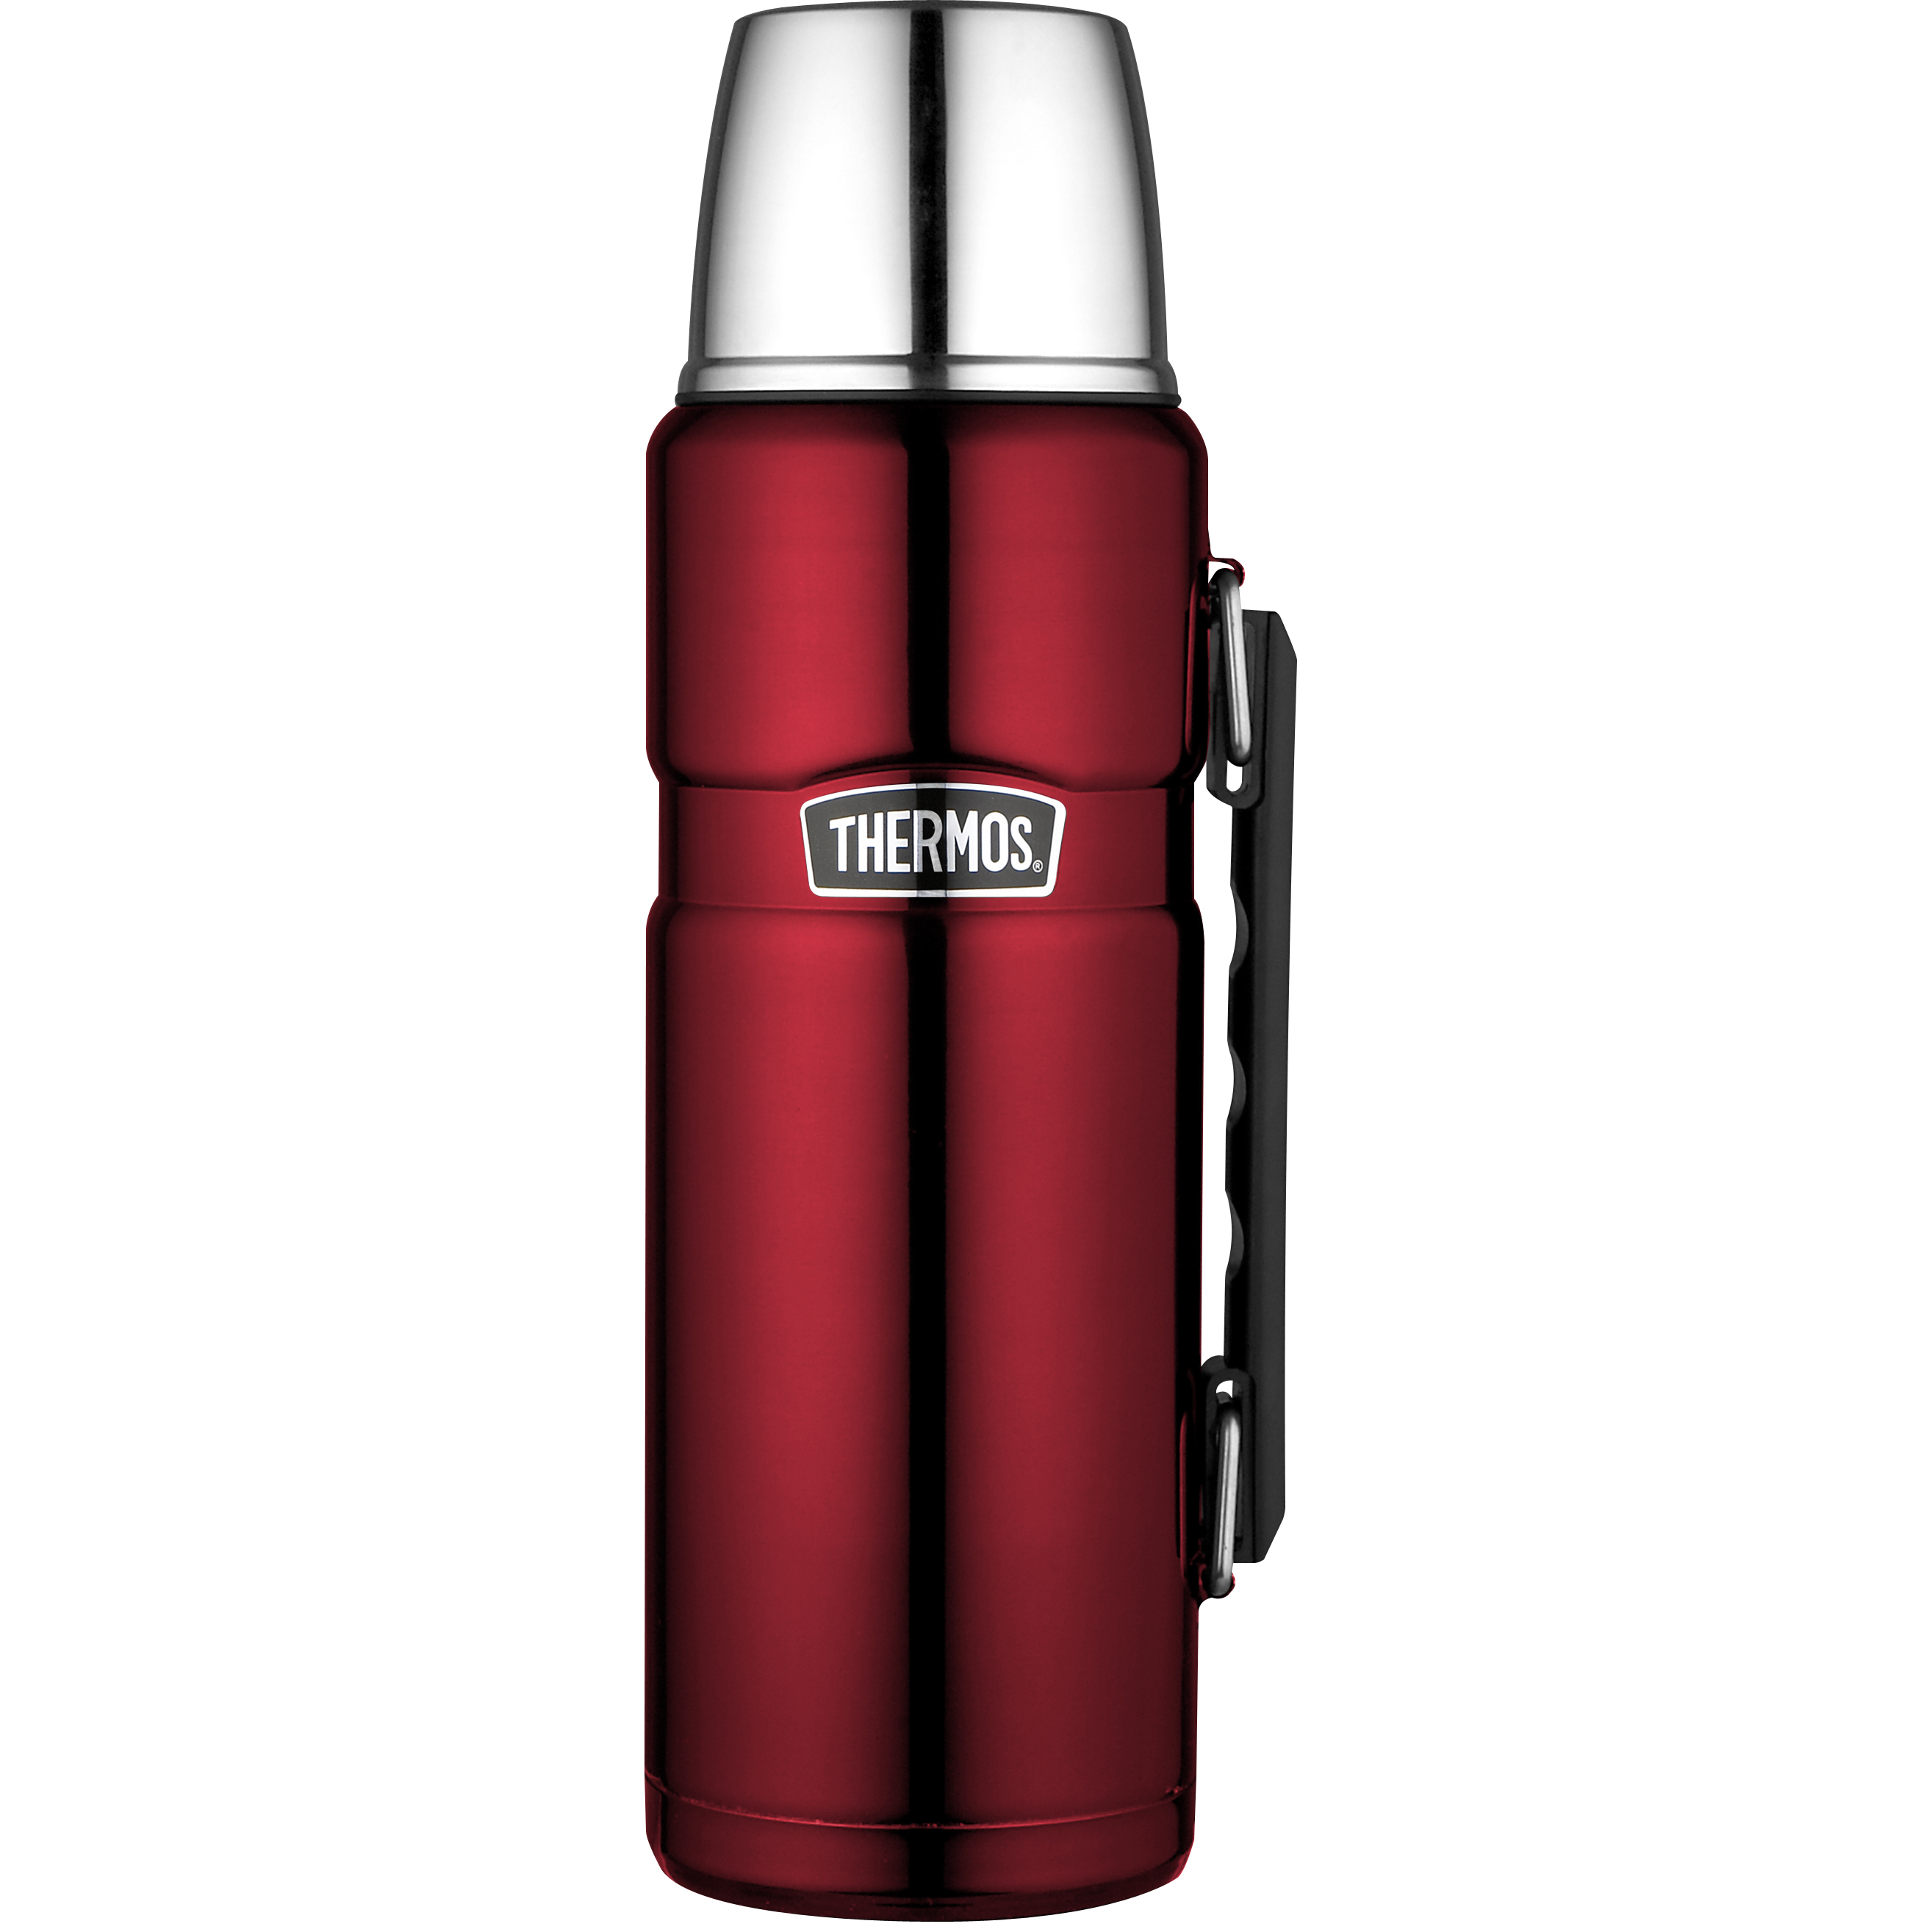 Thermos SK2010CRTRI4 Stainless King Bottle, 1.2L (Cranberry Red) - image 1 of 5